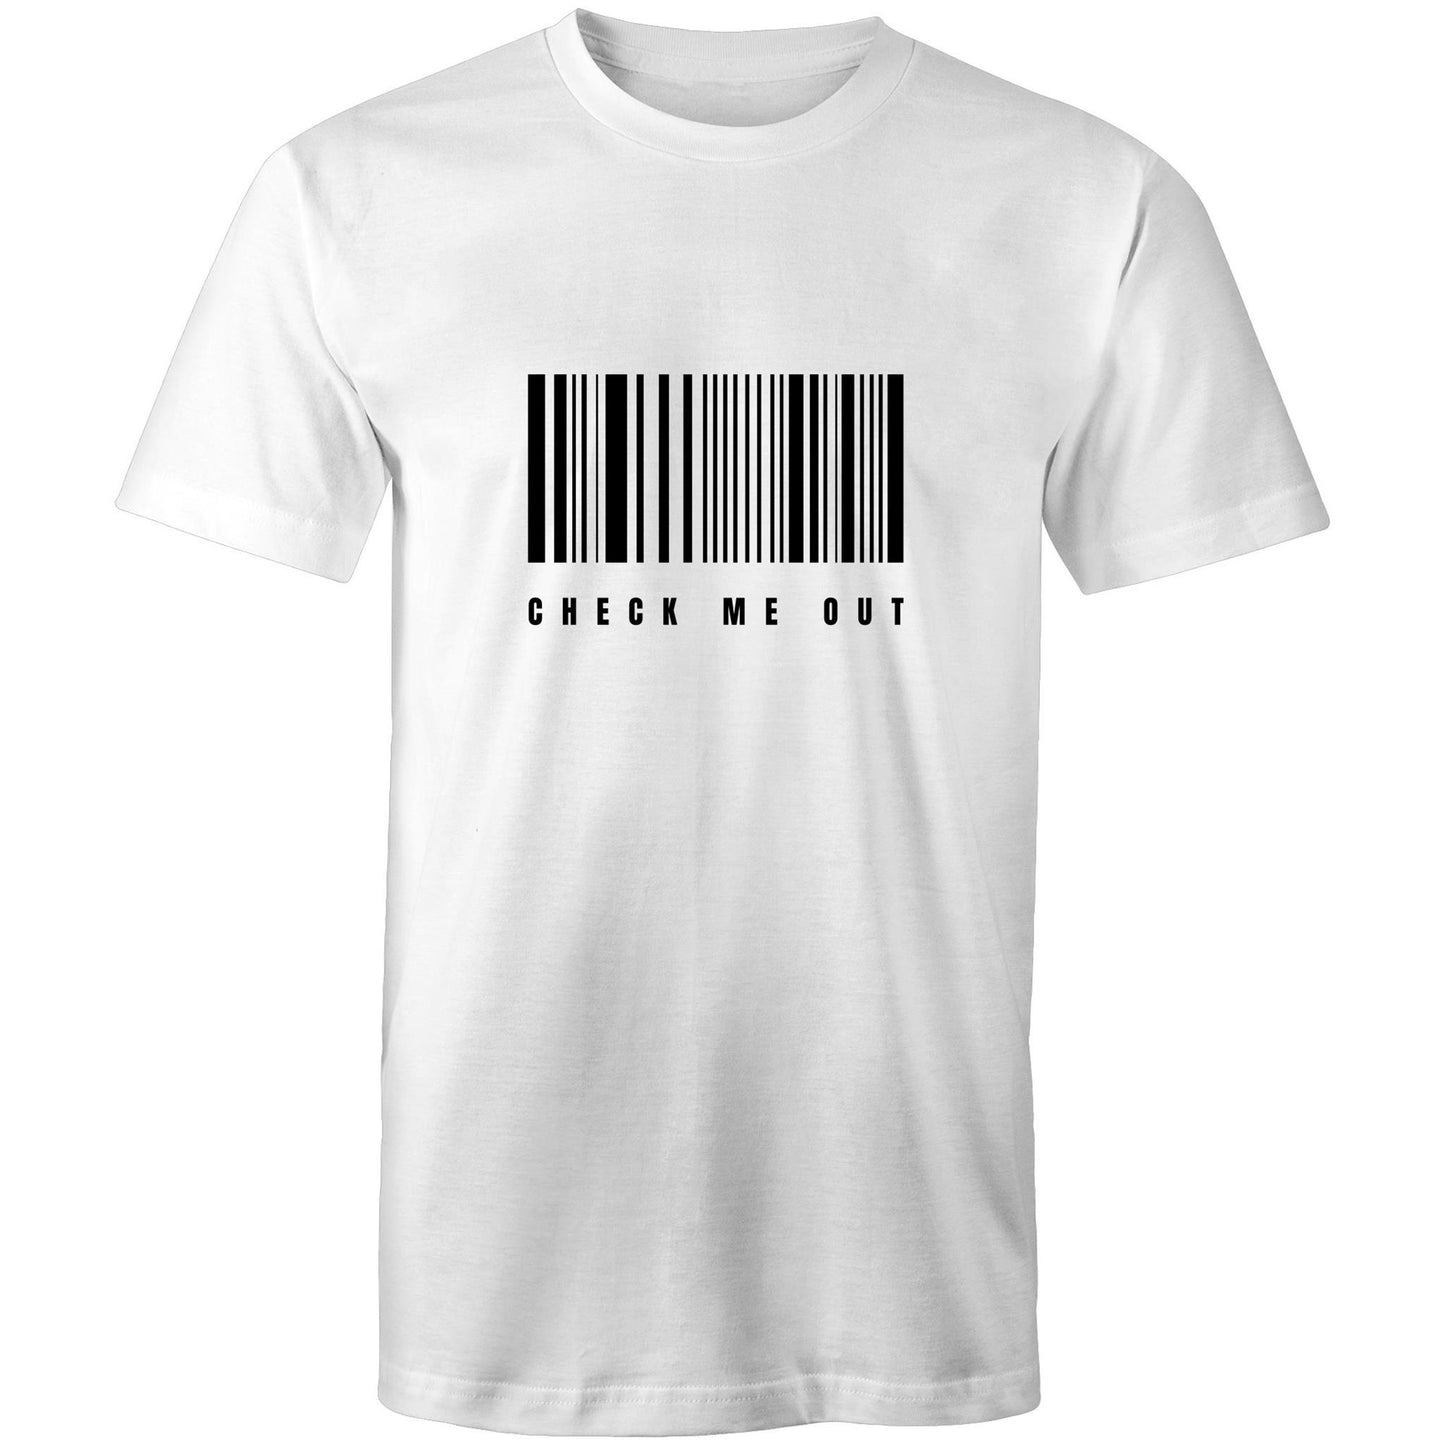 Current Mood 'CHECK ME OUT' - Mens T-Shirt